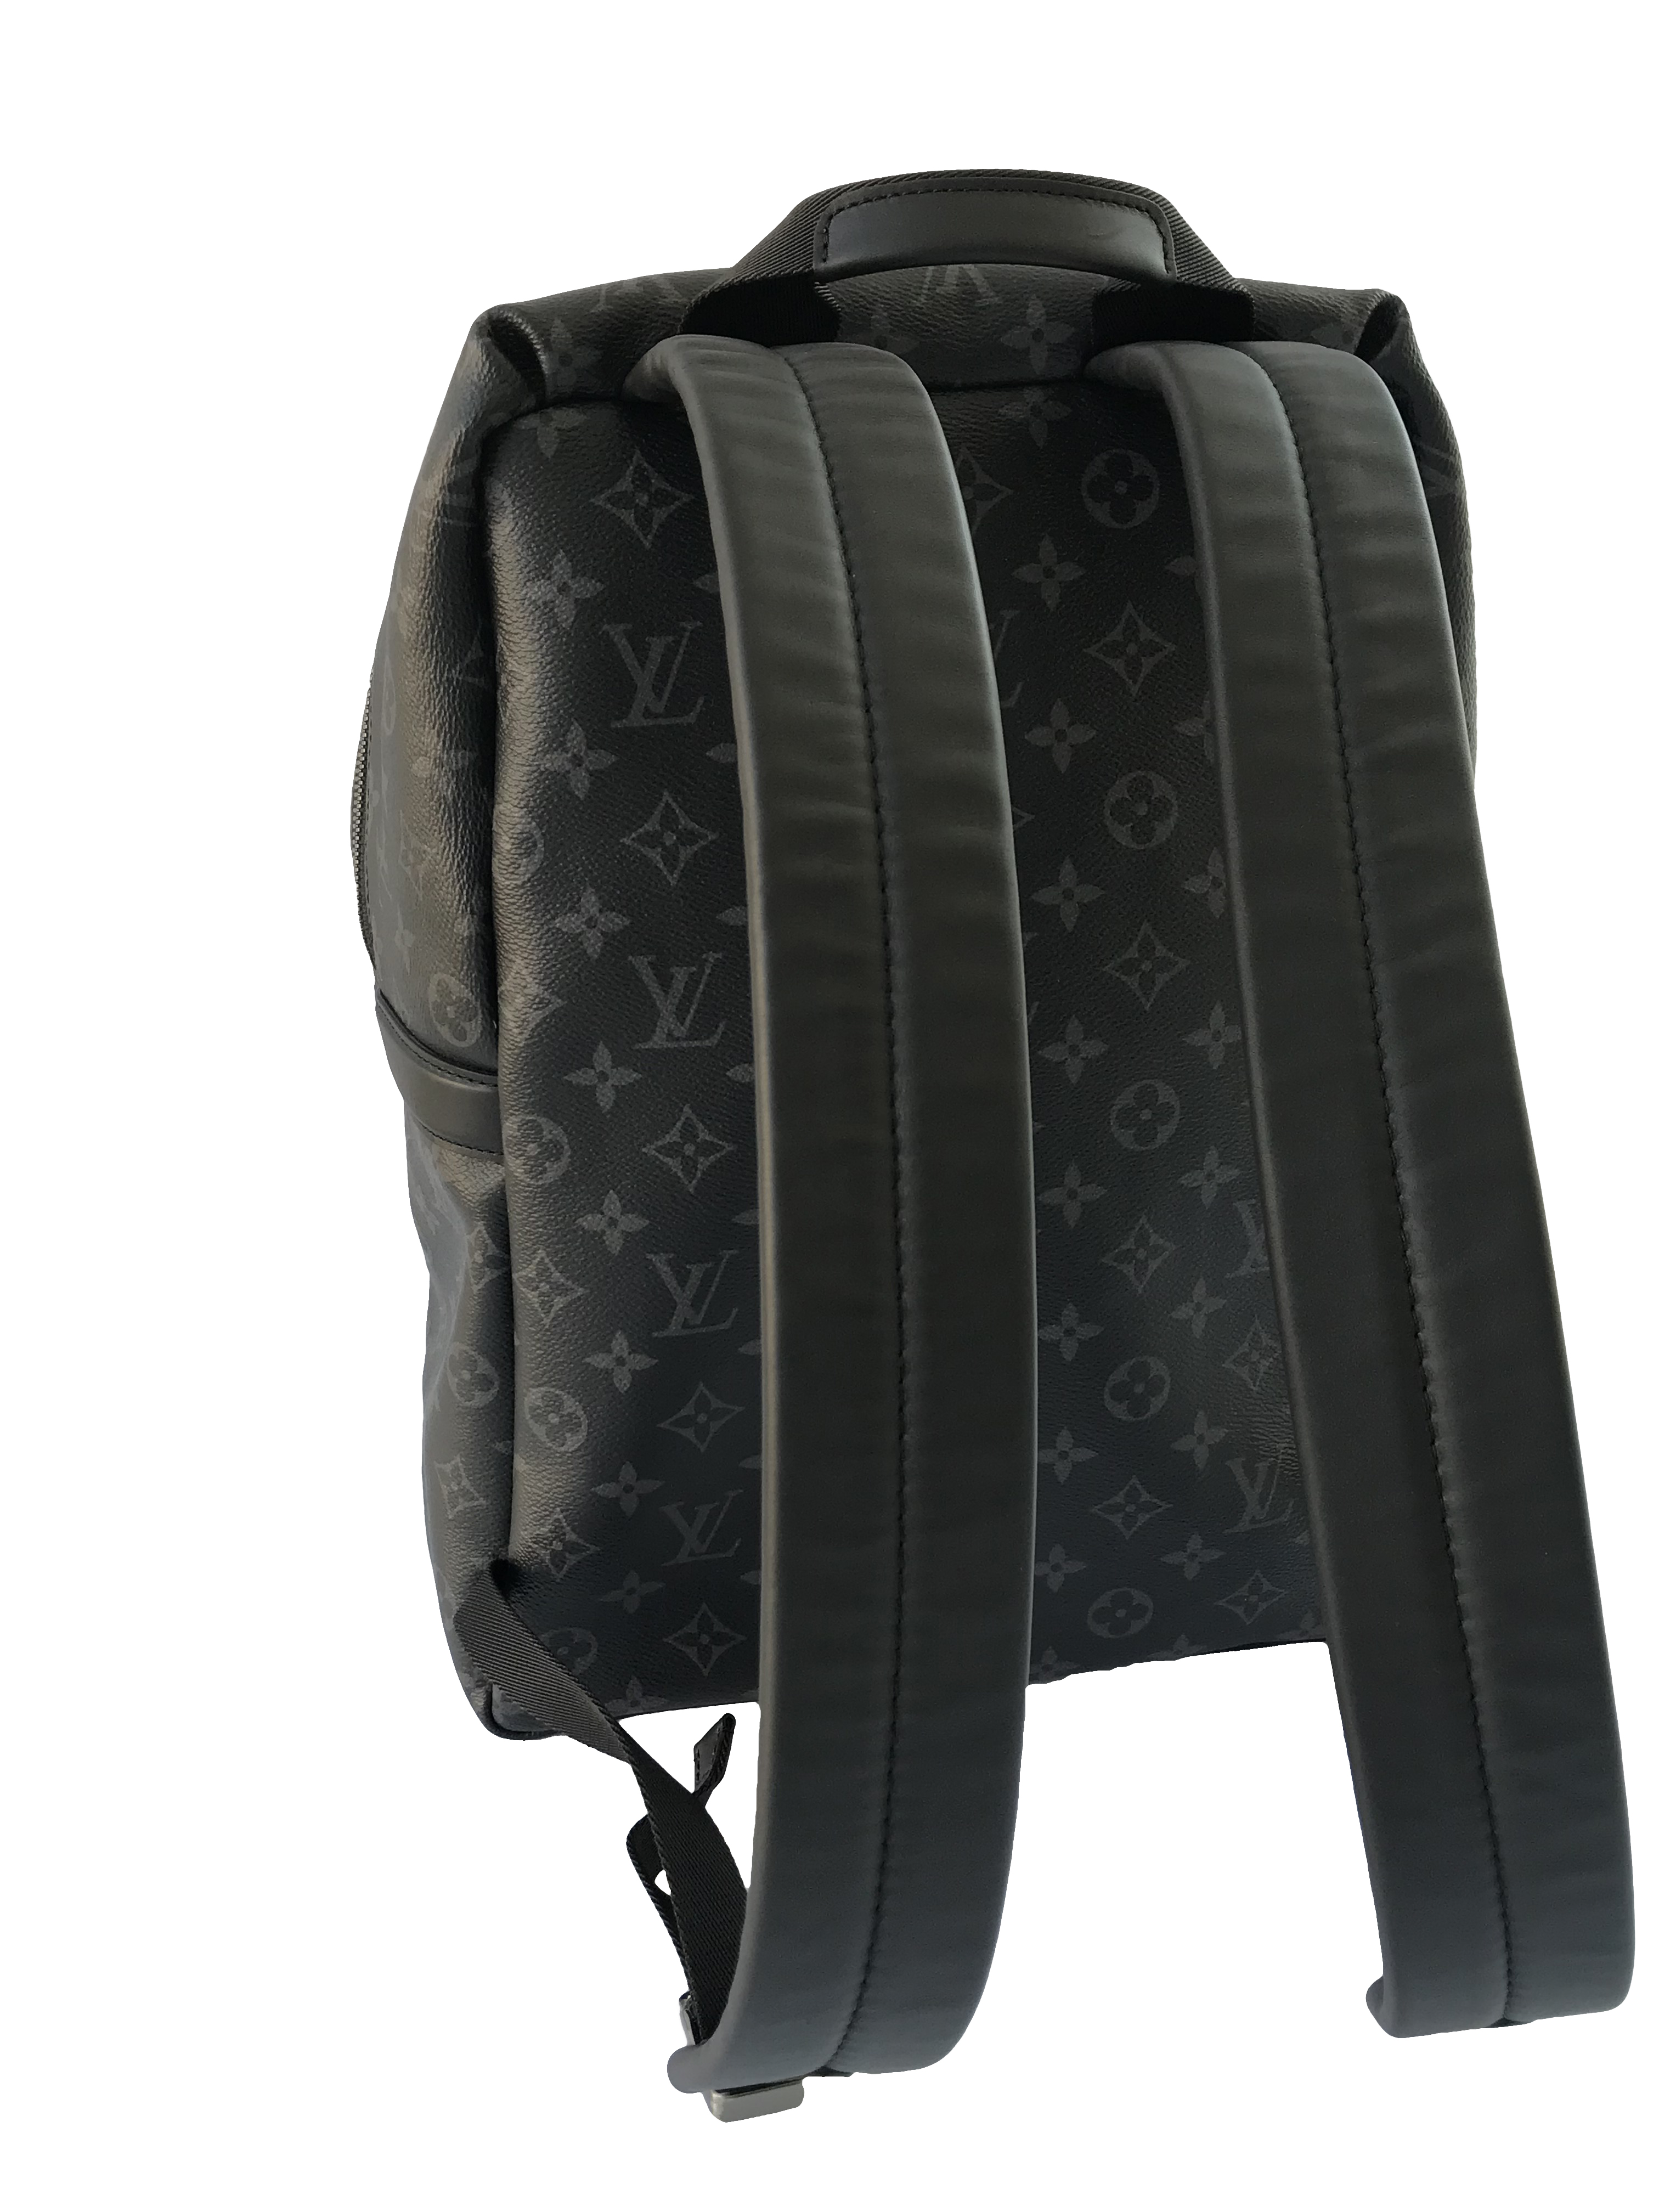 Discovery Backpack Monogram Eclipse - Bags M43186